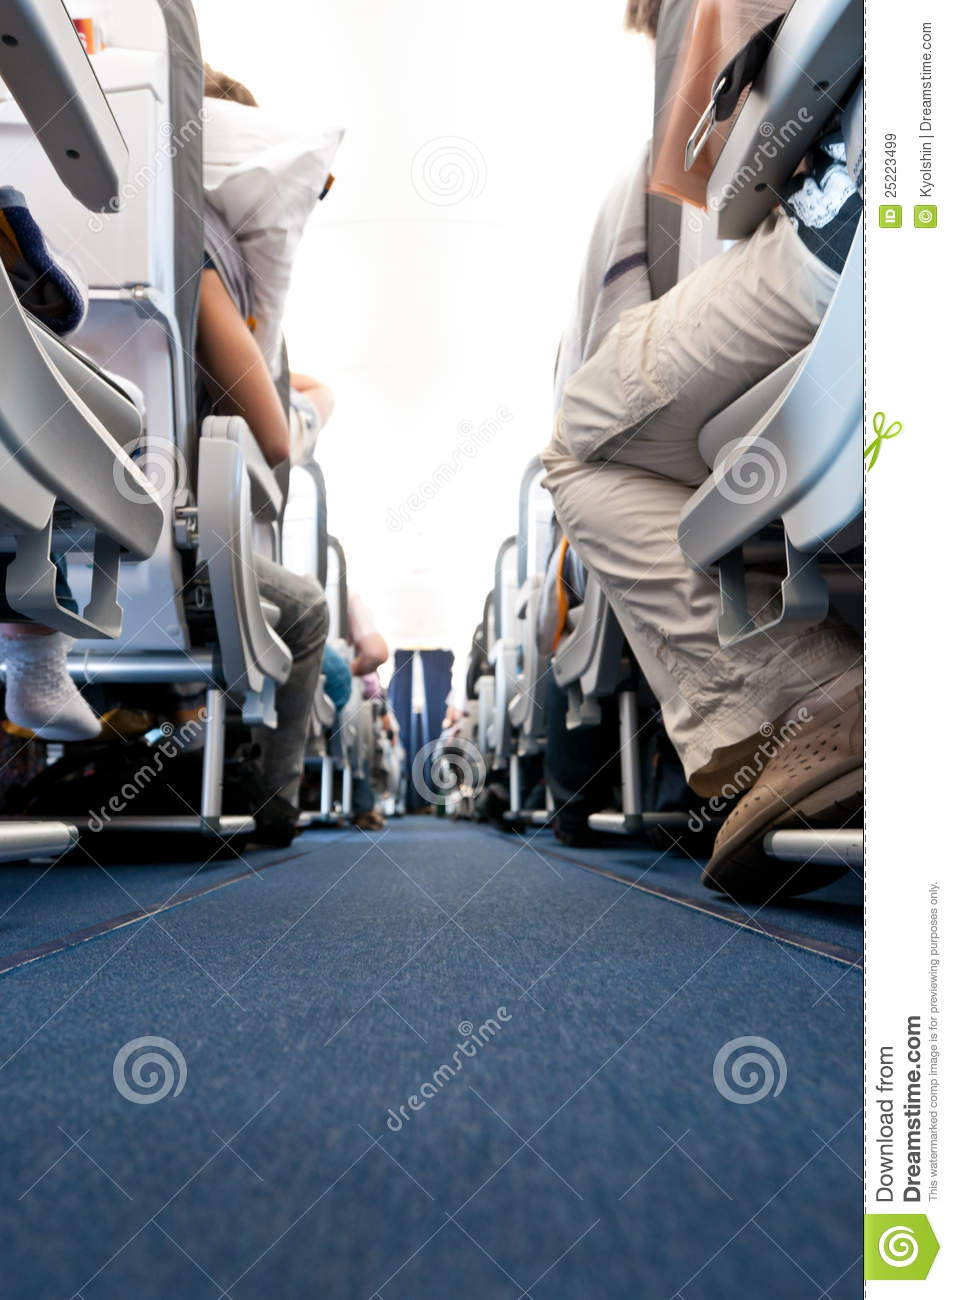 View From Floor Of Plane Cabin On Aisle Royalty Free Stock Images